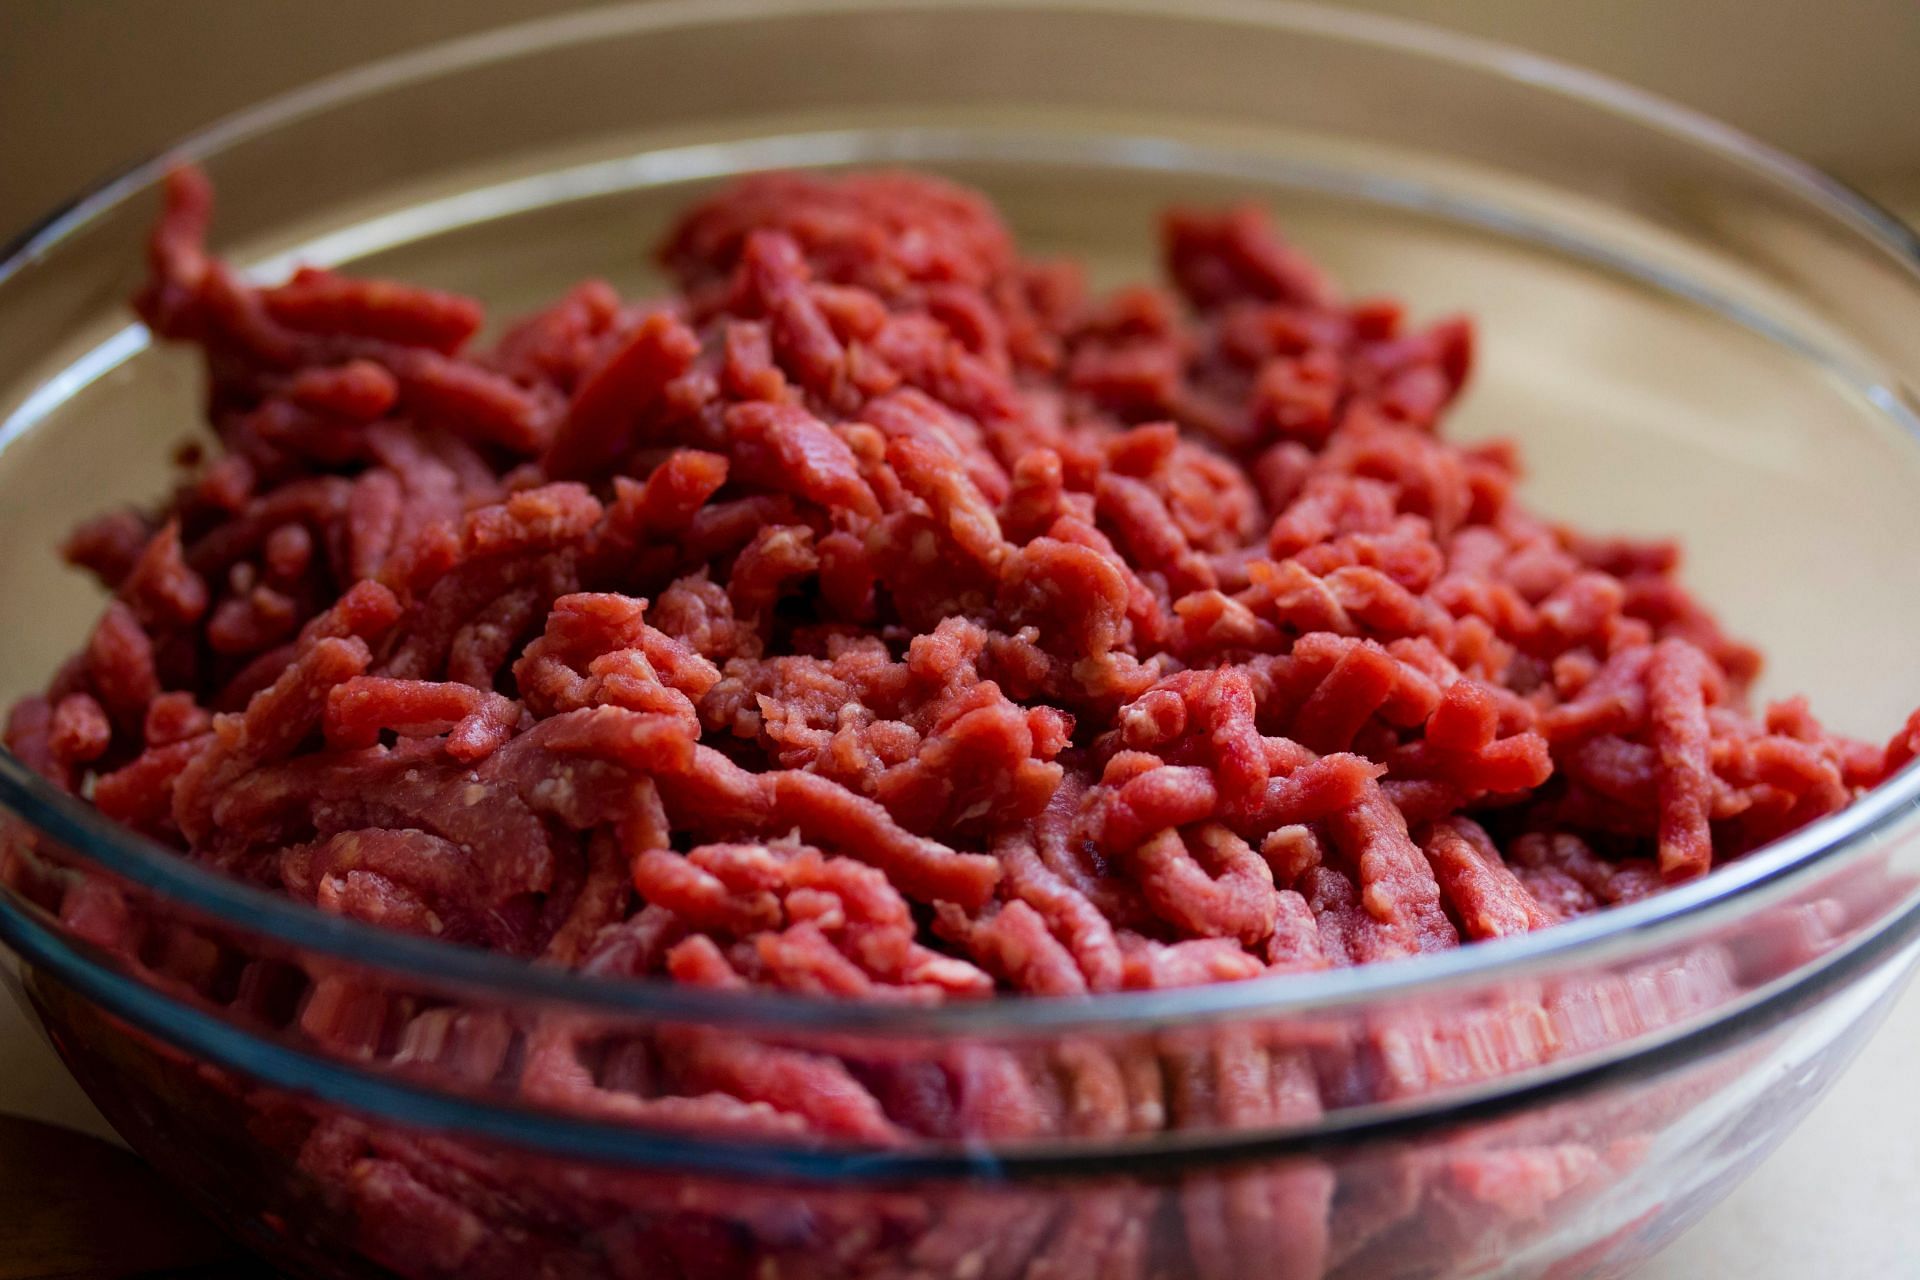 Is Ground Beef Good for Your Diet?